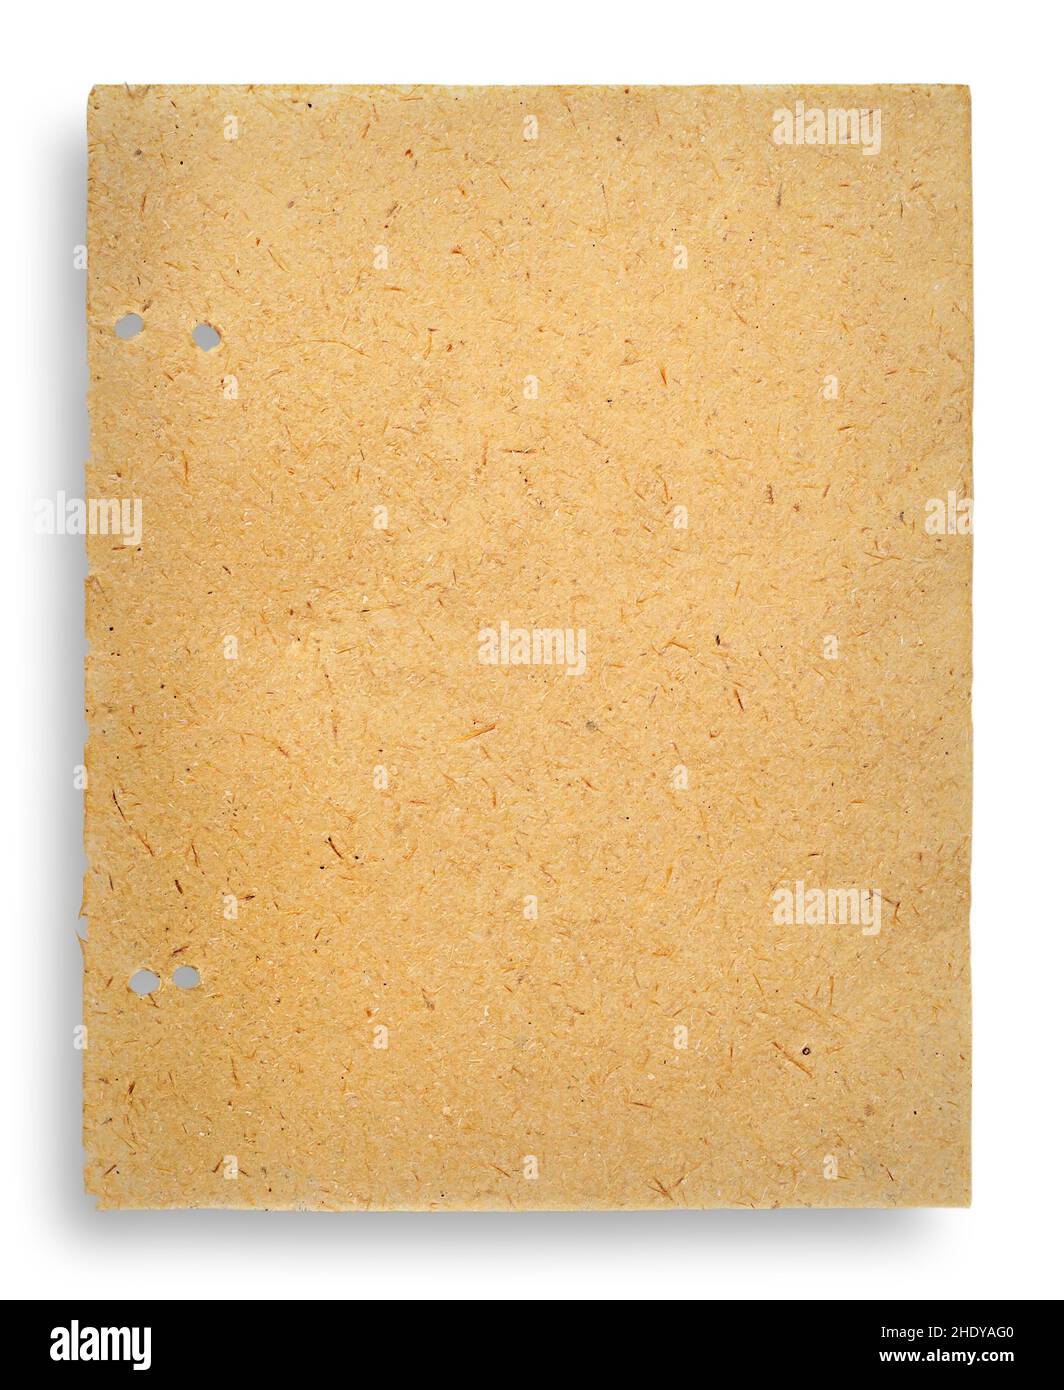 paper, perforated, papers Stock Photo